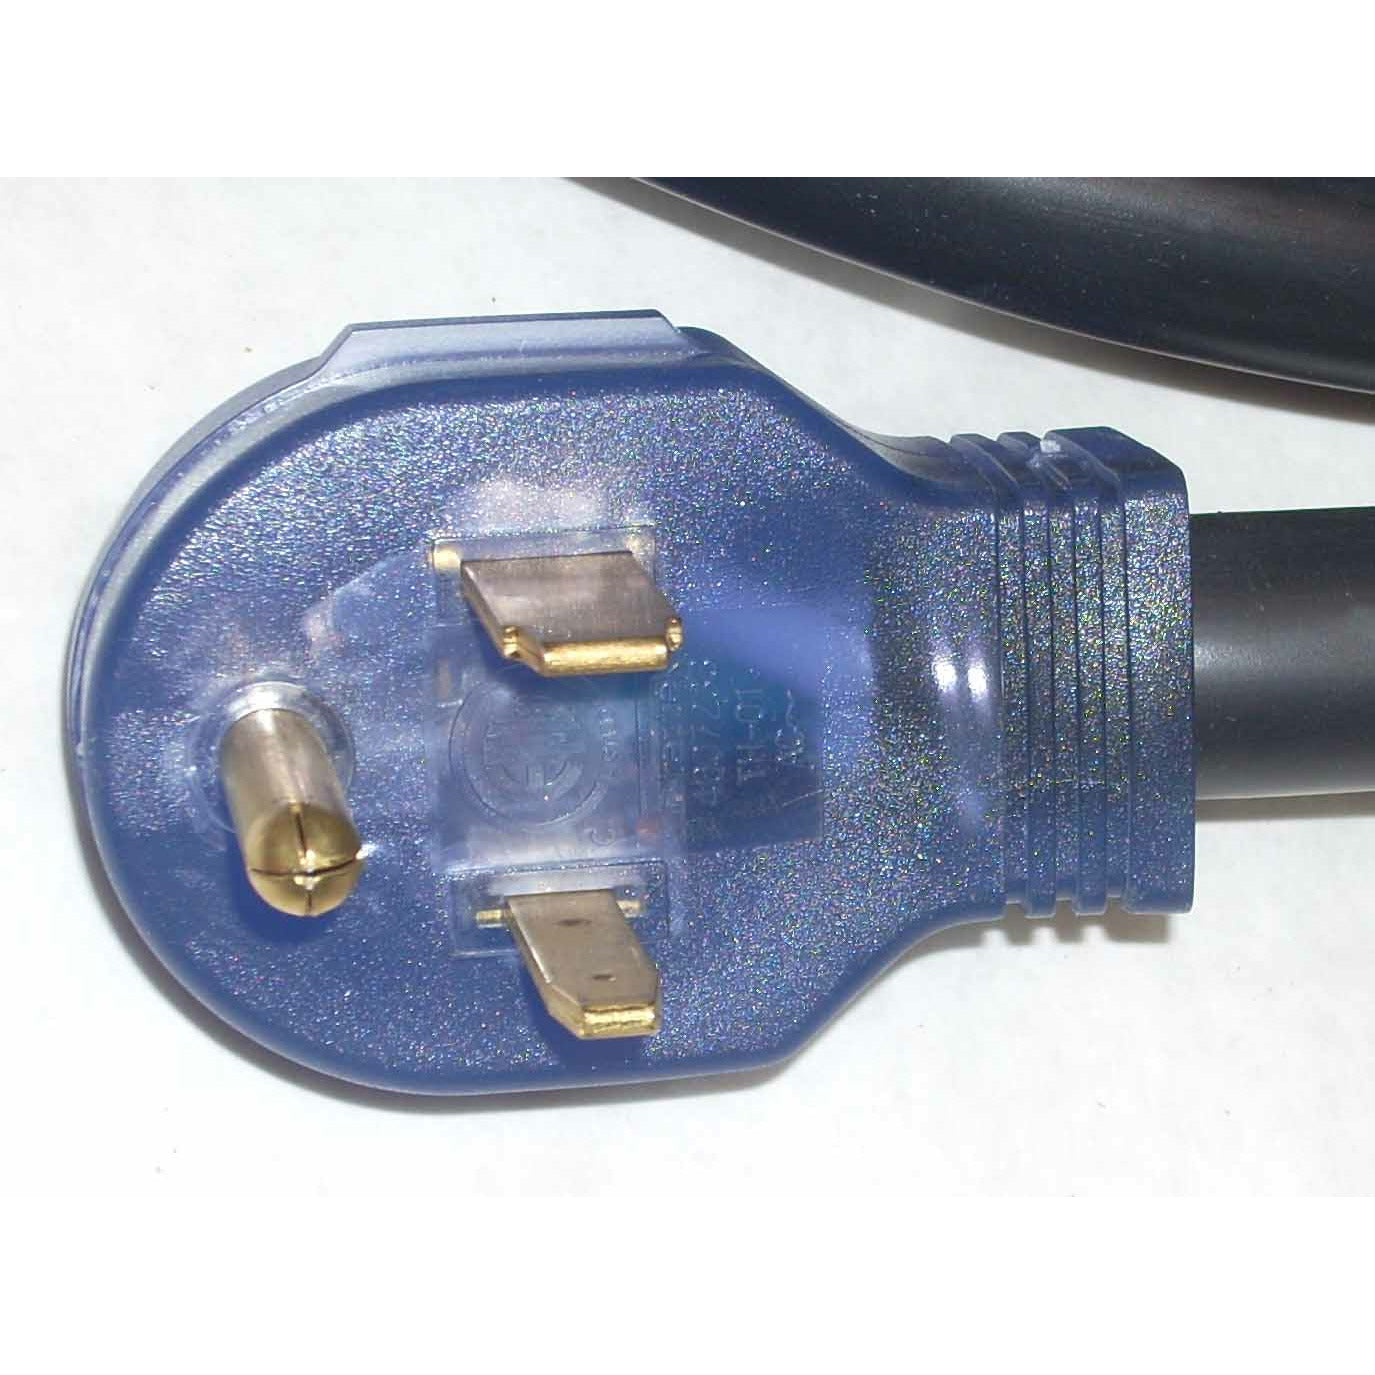 Welding Machine Extension Cable 50' 8/3 40A-250V - ATL Welding Supply